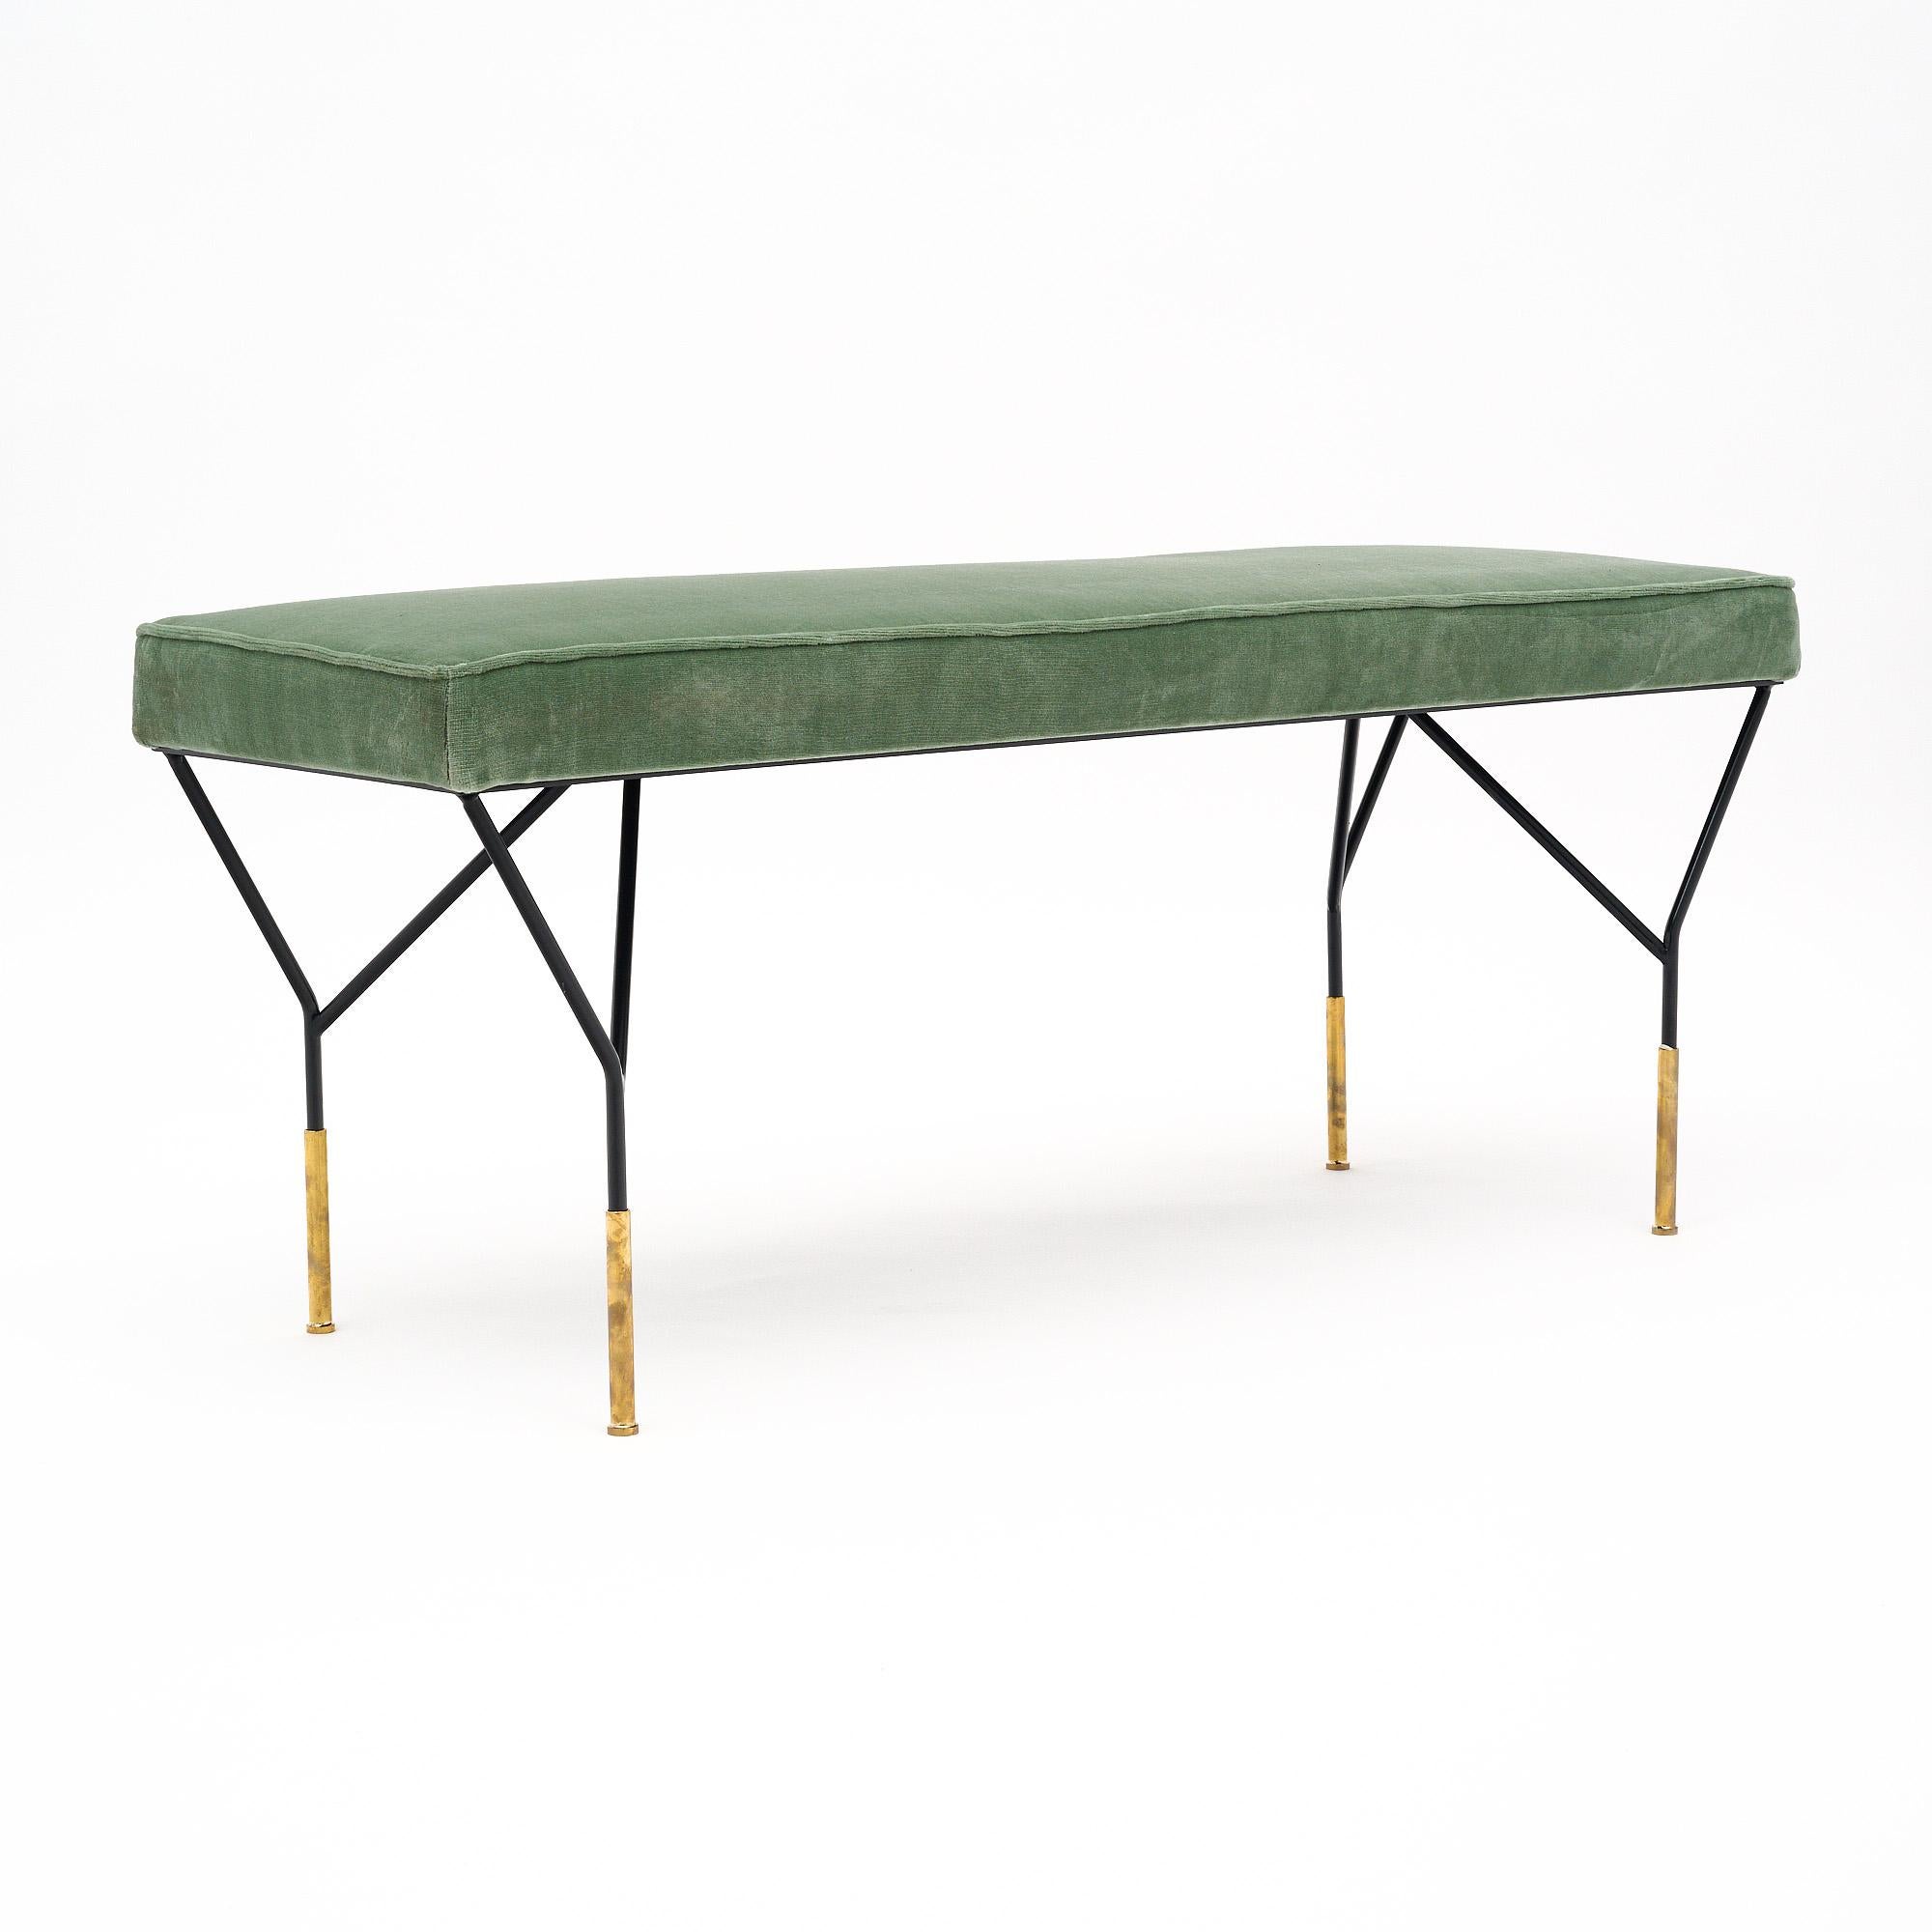 A dynamic bench in the style of Carlo di Carli. This piece features the black lacquered steel base with gilt brass feet so iconic of the designer. It is newly upholstered in a sage green velvet fabric.
